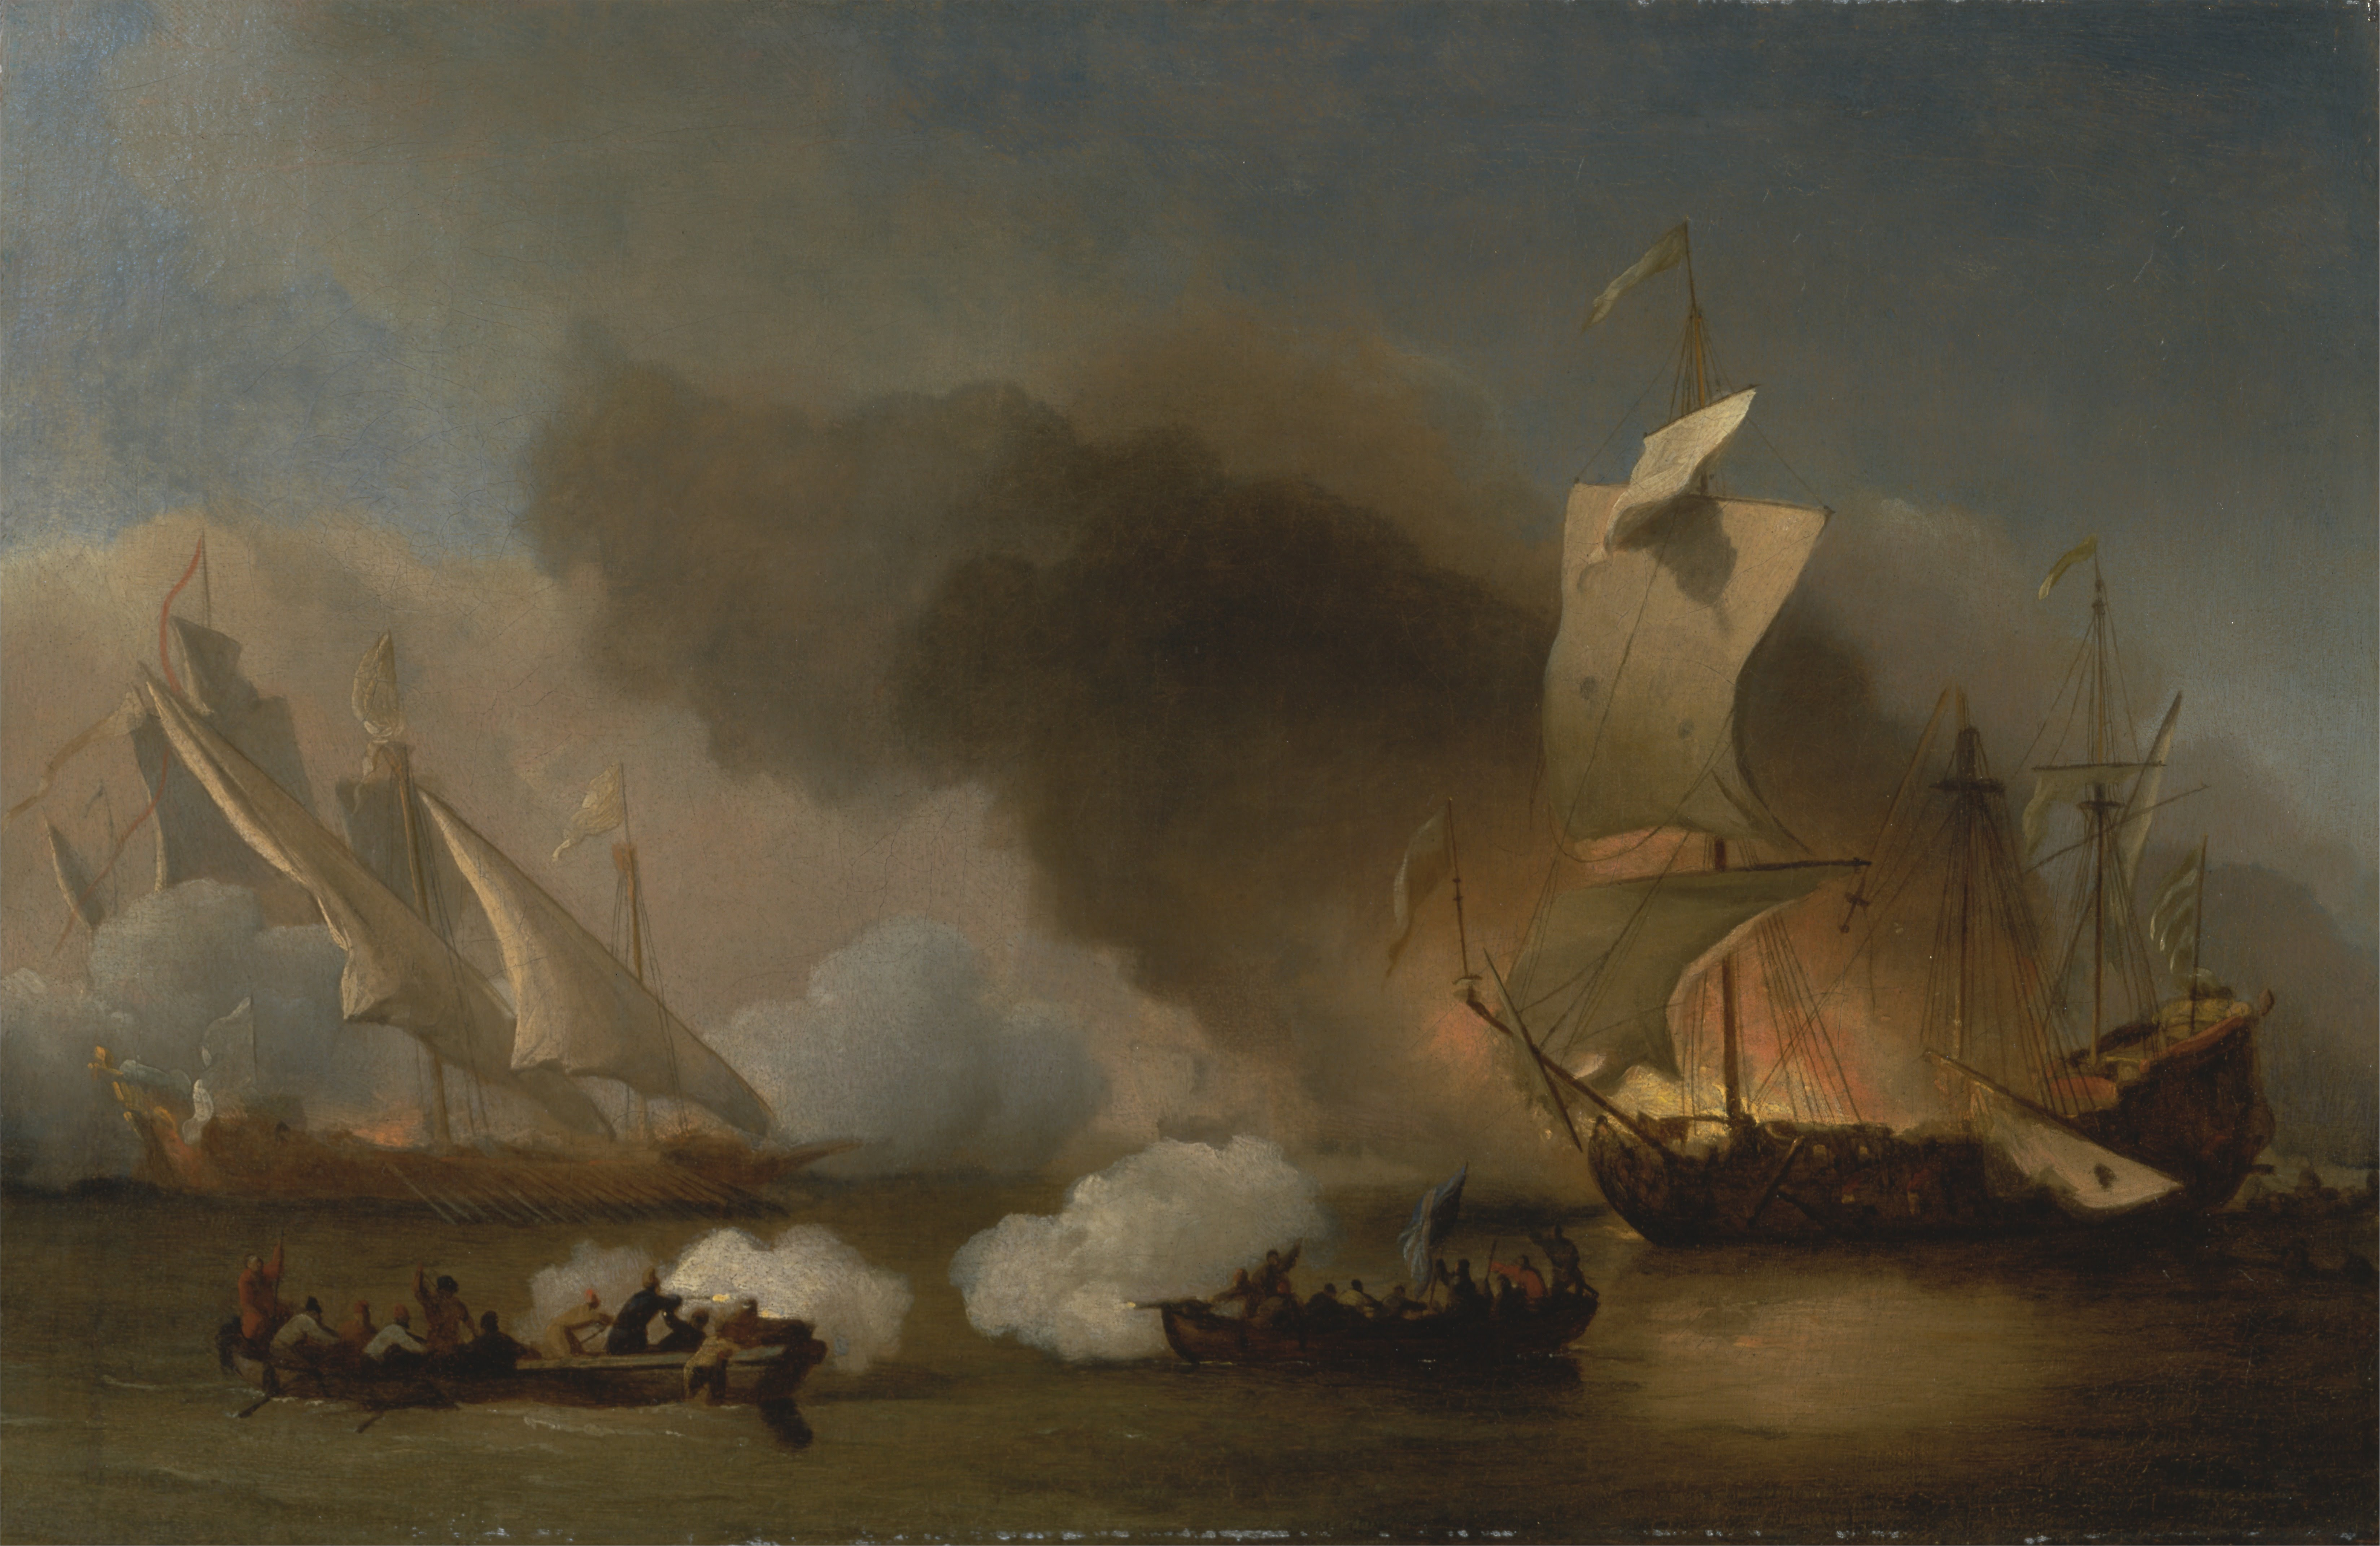 Willem_van_de_Velde_the_Younger_-_An_Action_off_the_Barbary_Coast_with_Galleys_and_English_Ships_-_Google_Art_Project.jpg